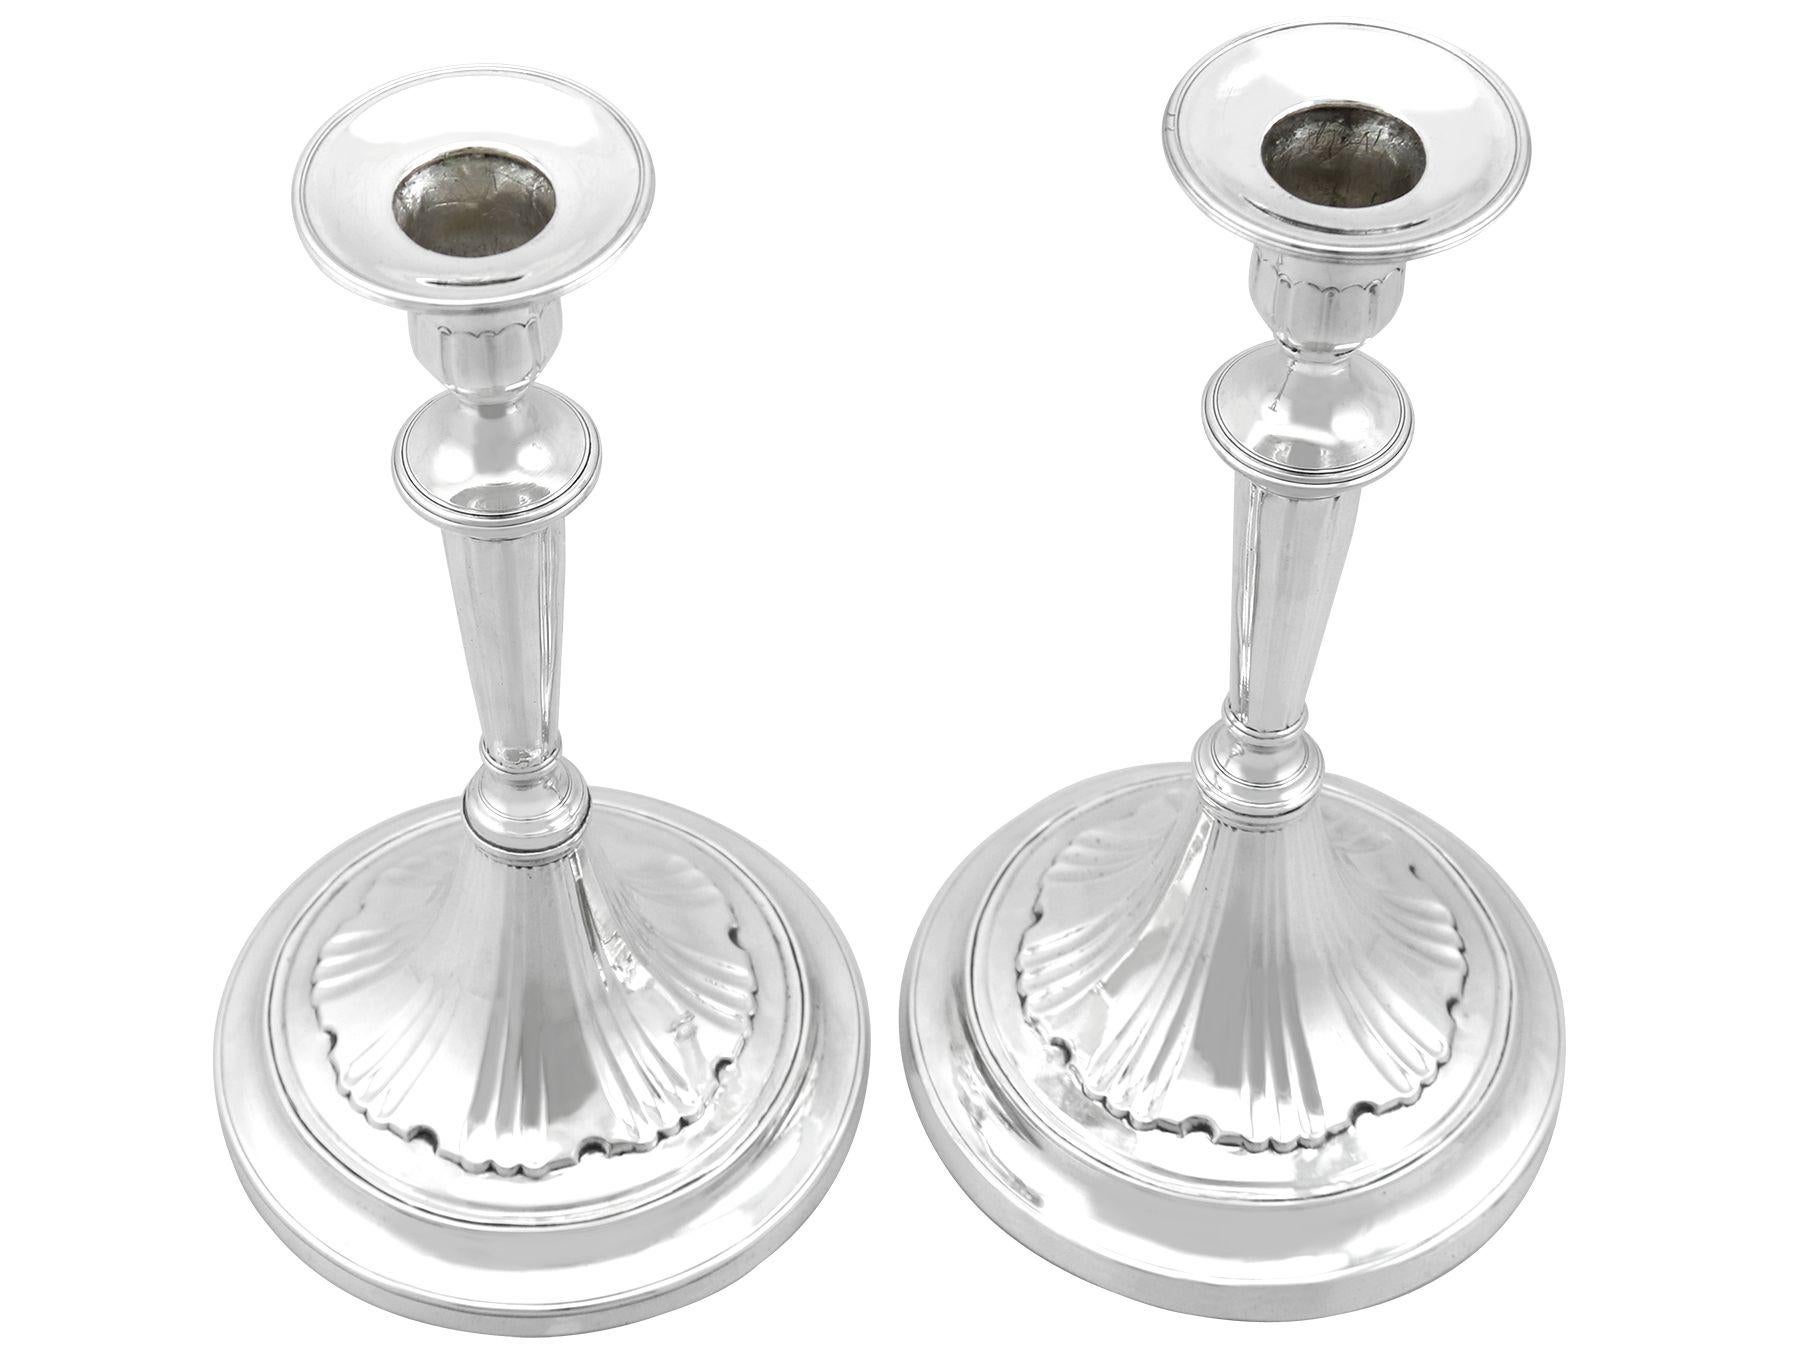 An exceptional, fine and impressive pair of antique Portuguese cast silver candlesticks; part of our 19th century ornamental silverware collection

These exceptional antique Portuguese cast silver candlesticks have a circular rounded knopped form to